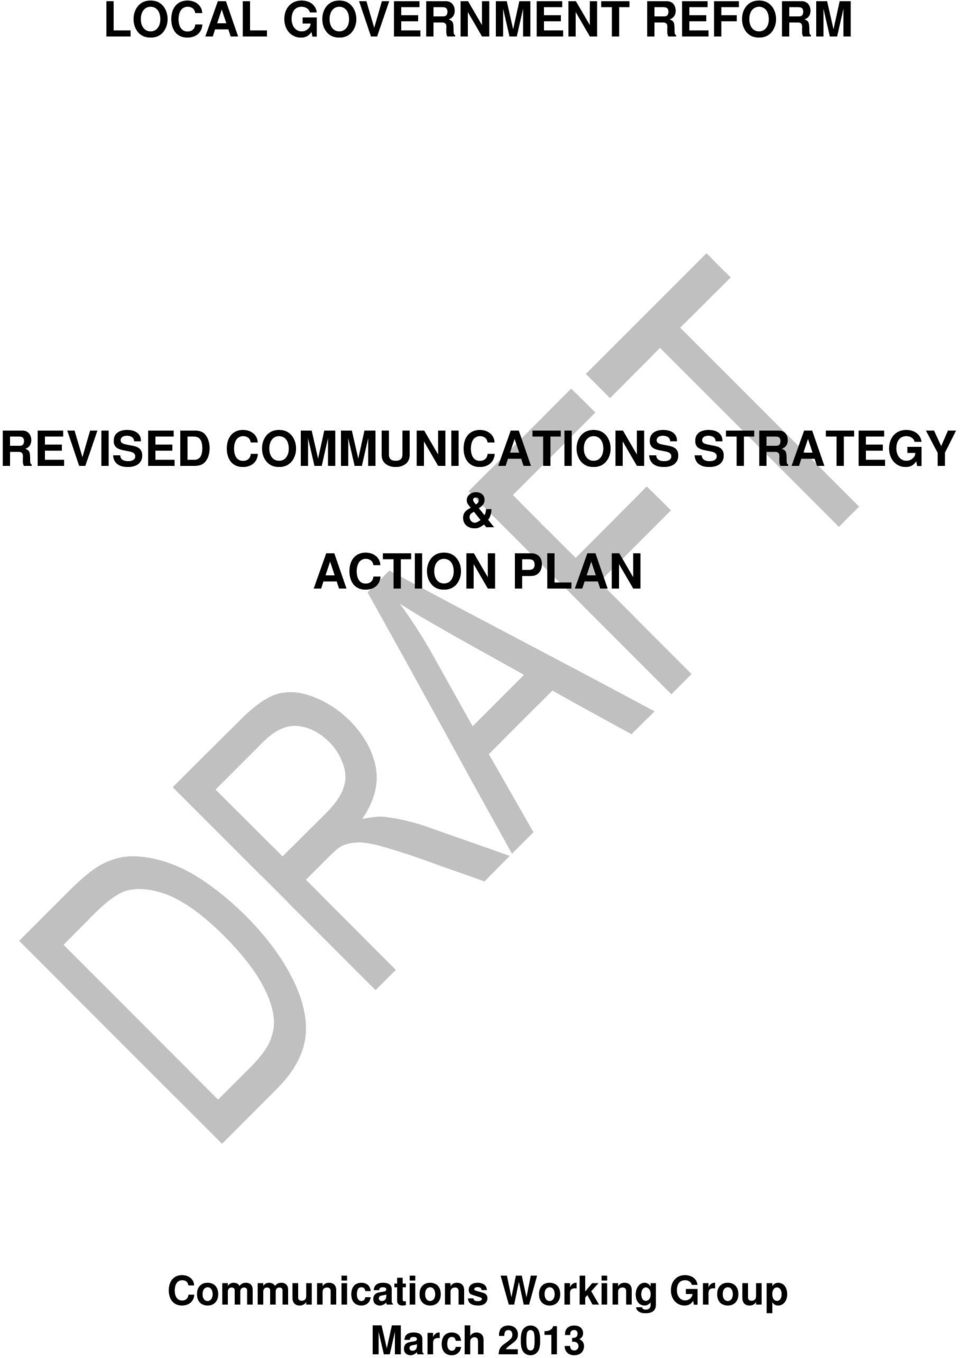 STRATEGY & ACTION PLAN